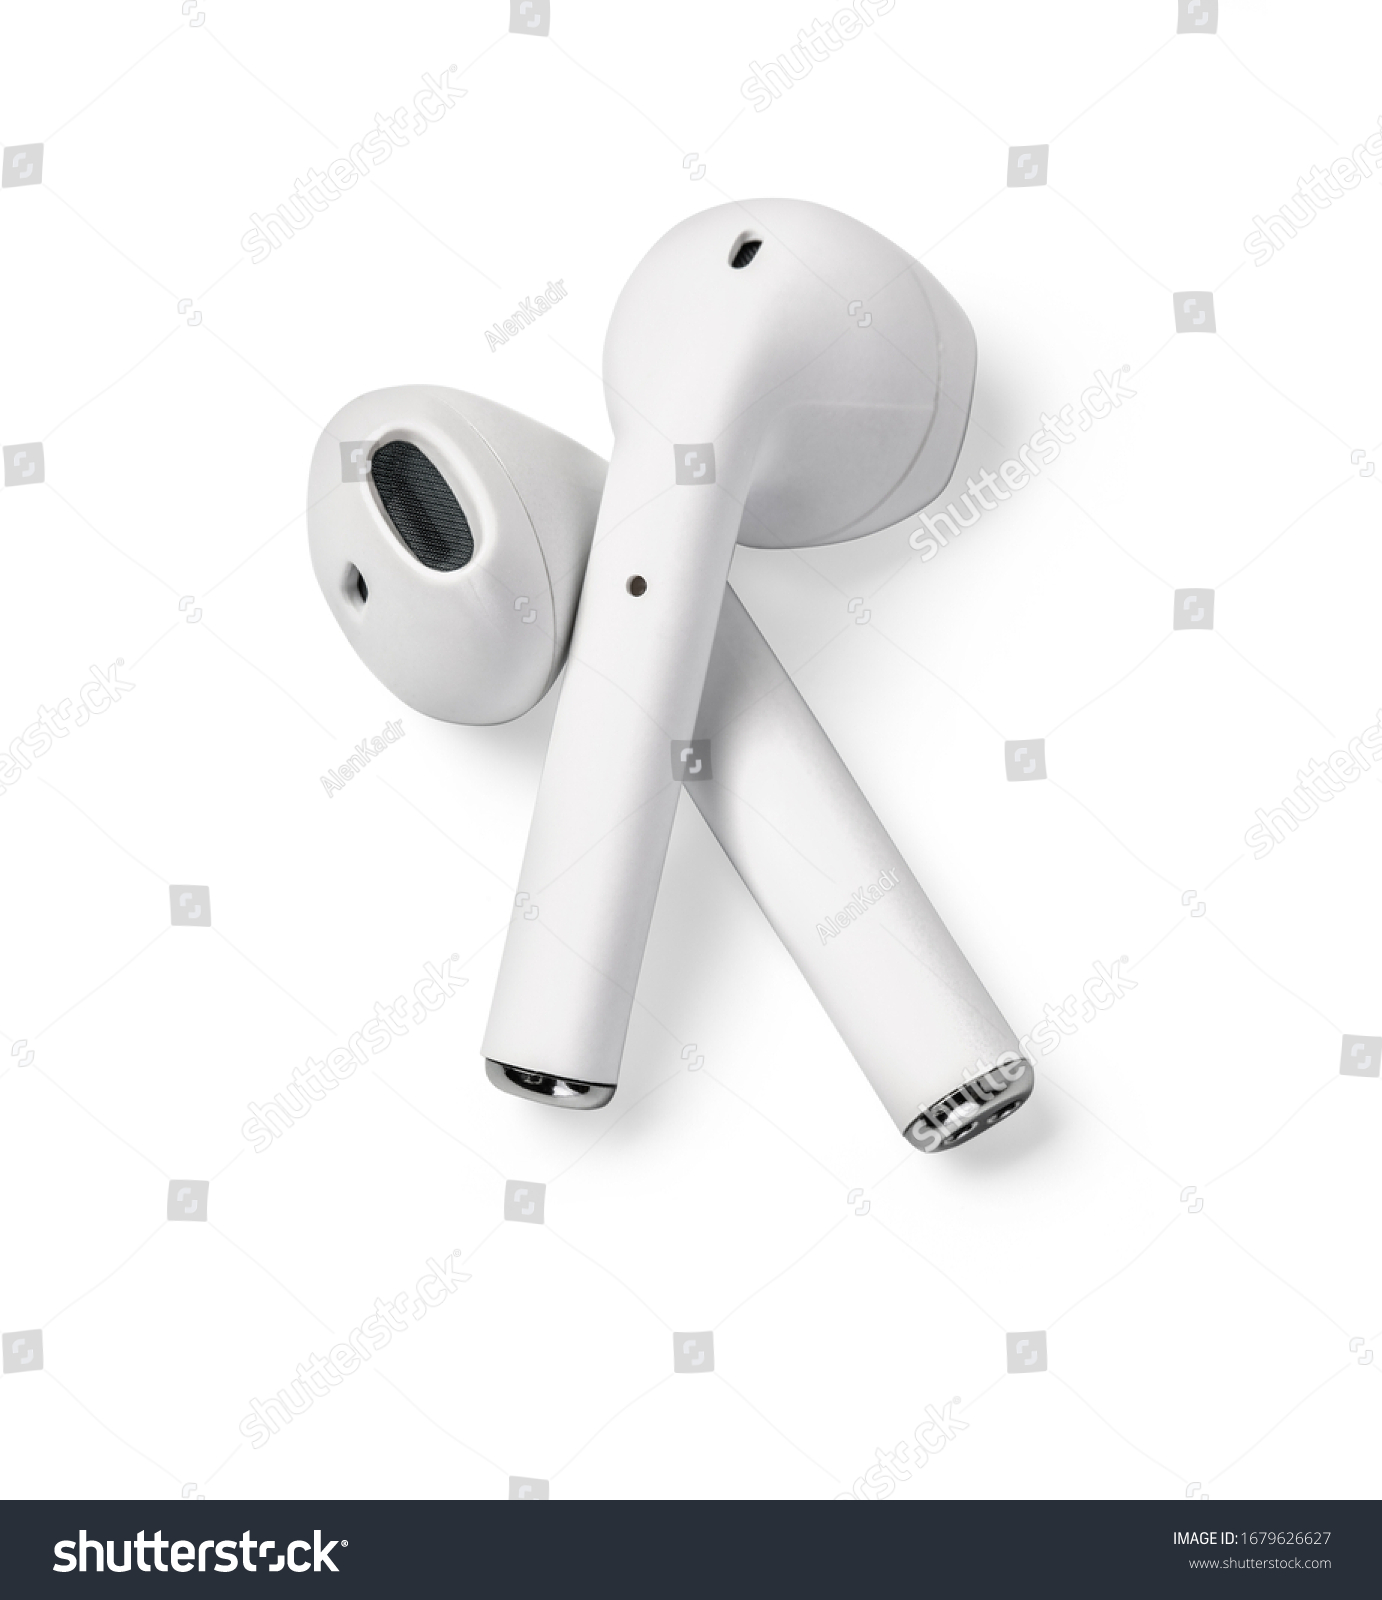 White headphones wireless earphones isolated on white with clipping path #1679626627